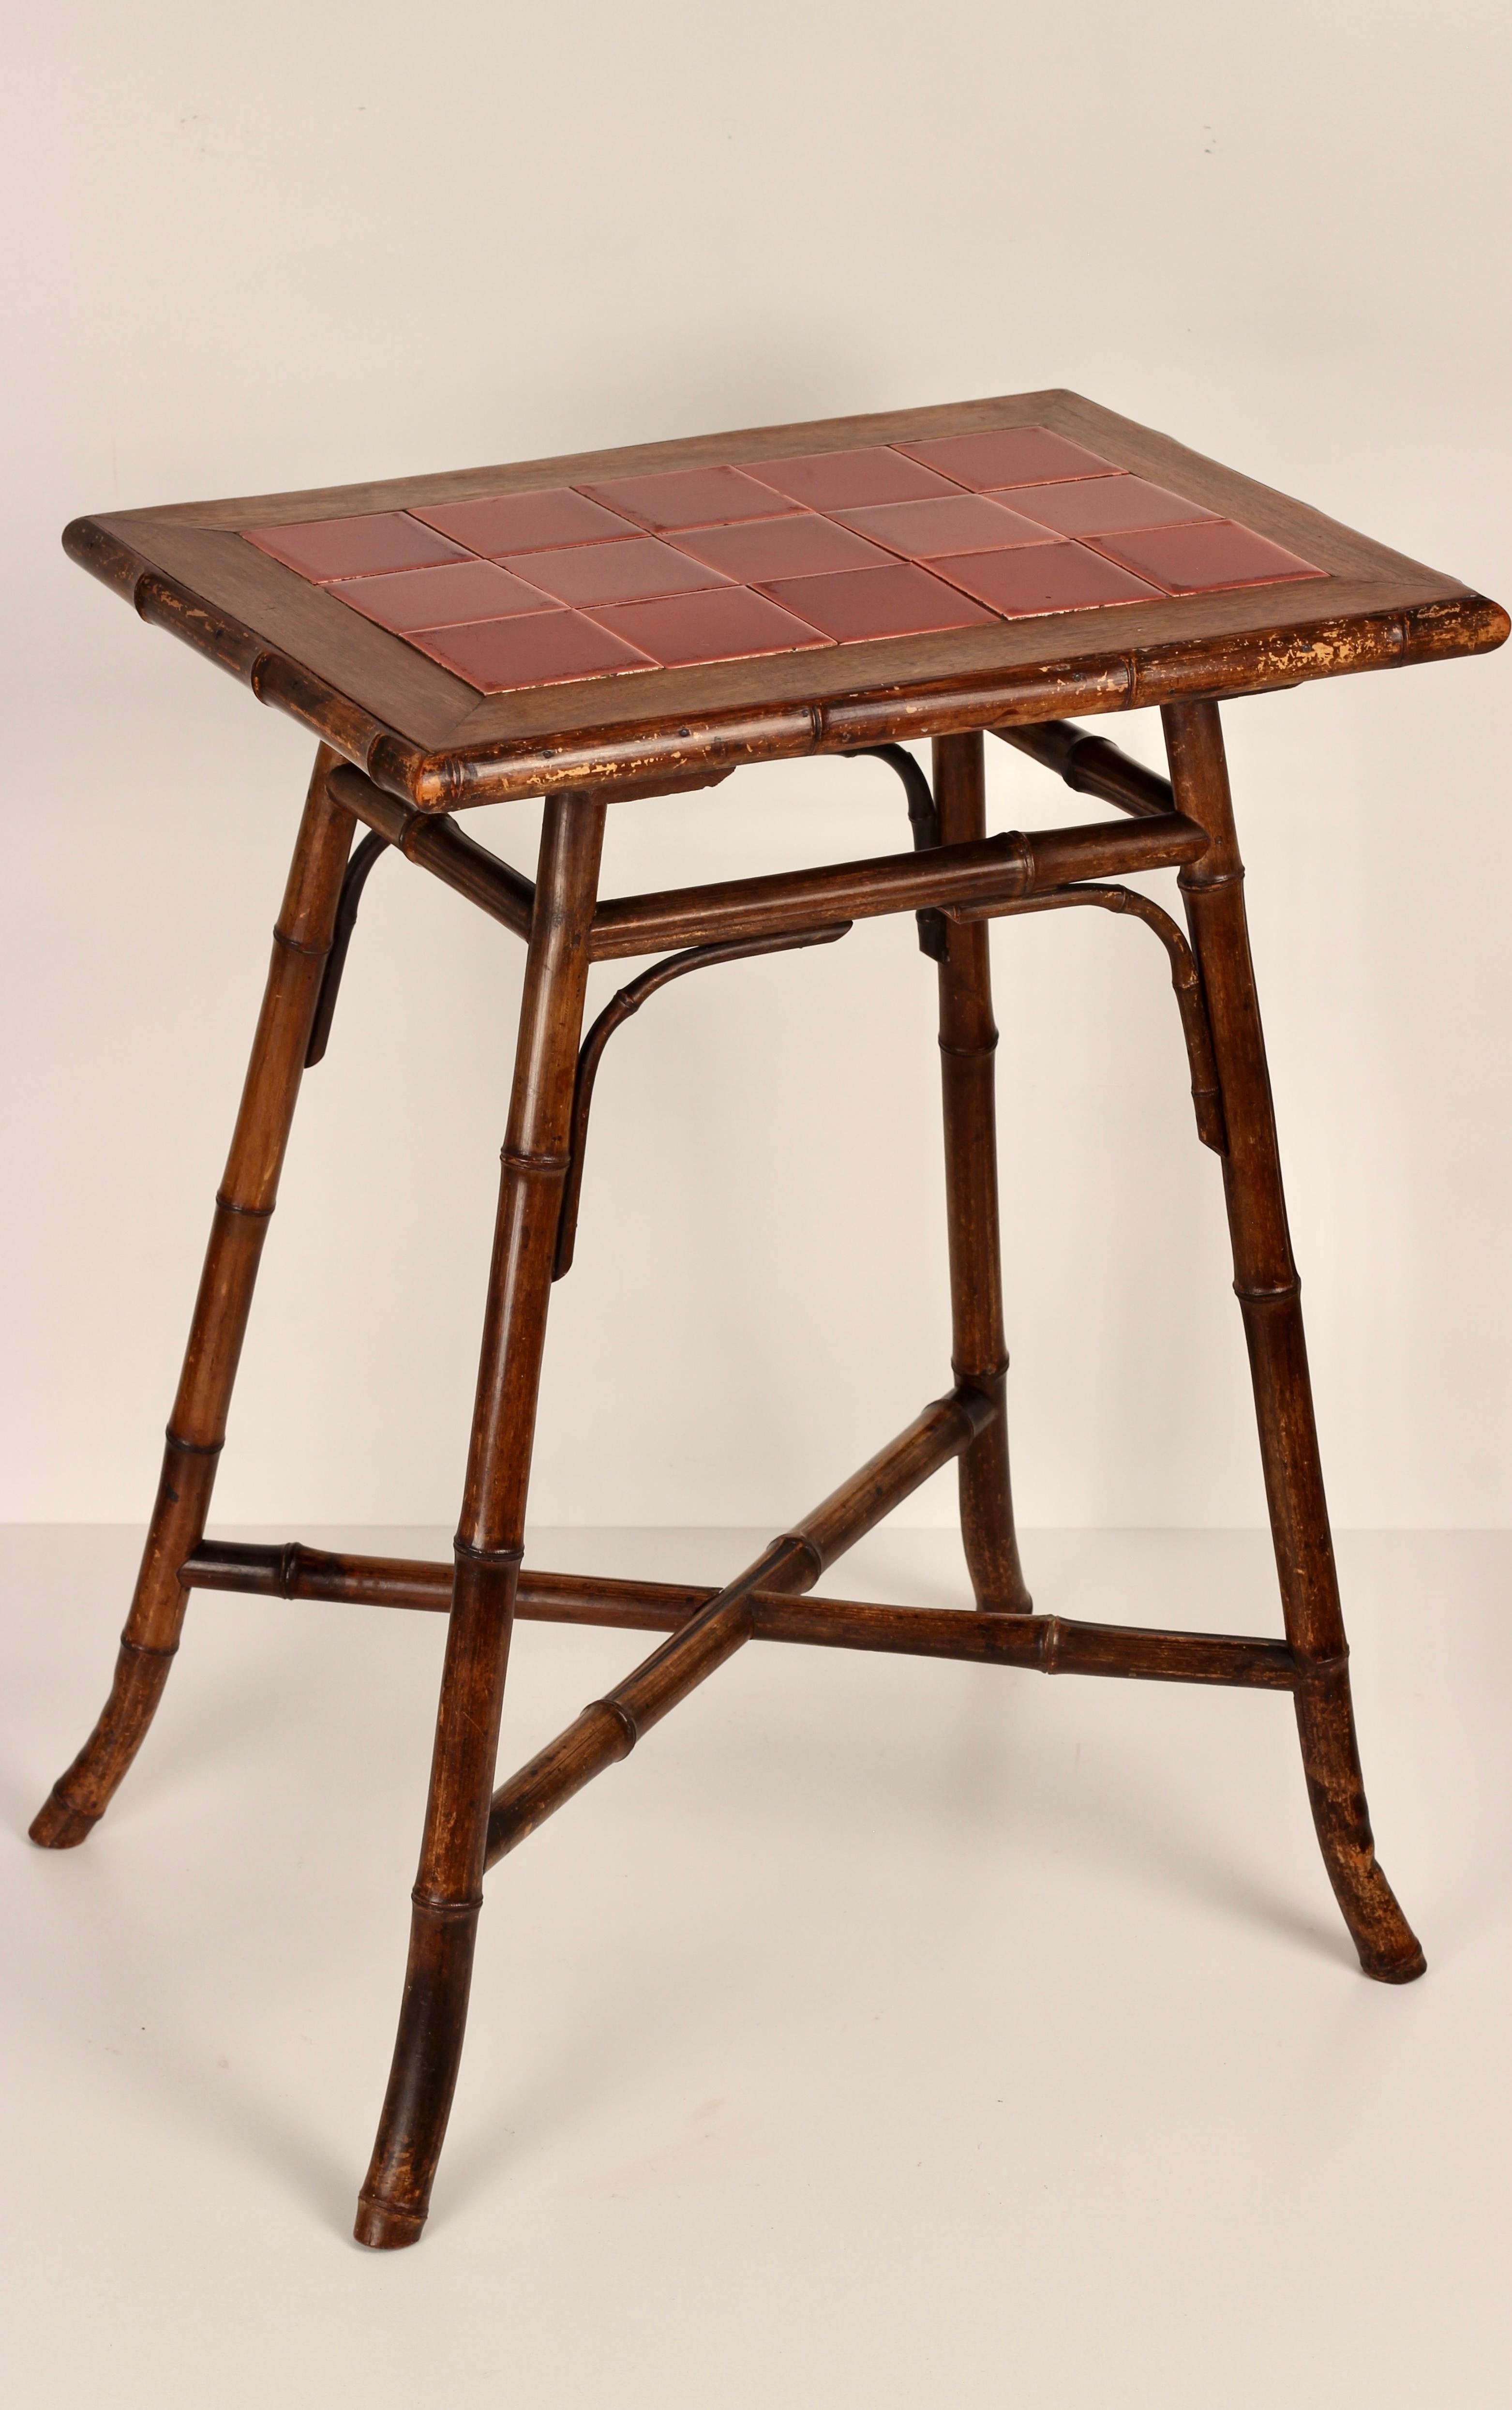 Boho Chic Steam Bent Bamboo Side Table with Deep Red Ceramic Tiled Top 1890’s For Sale 2